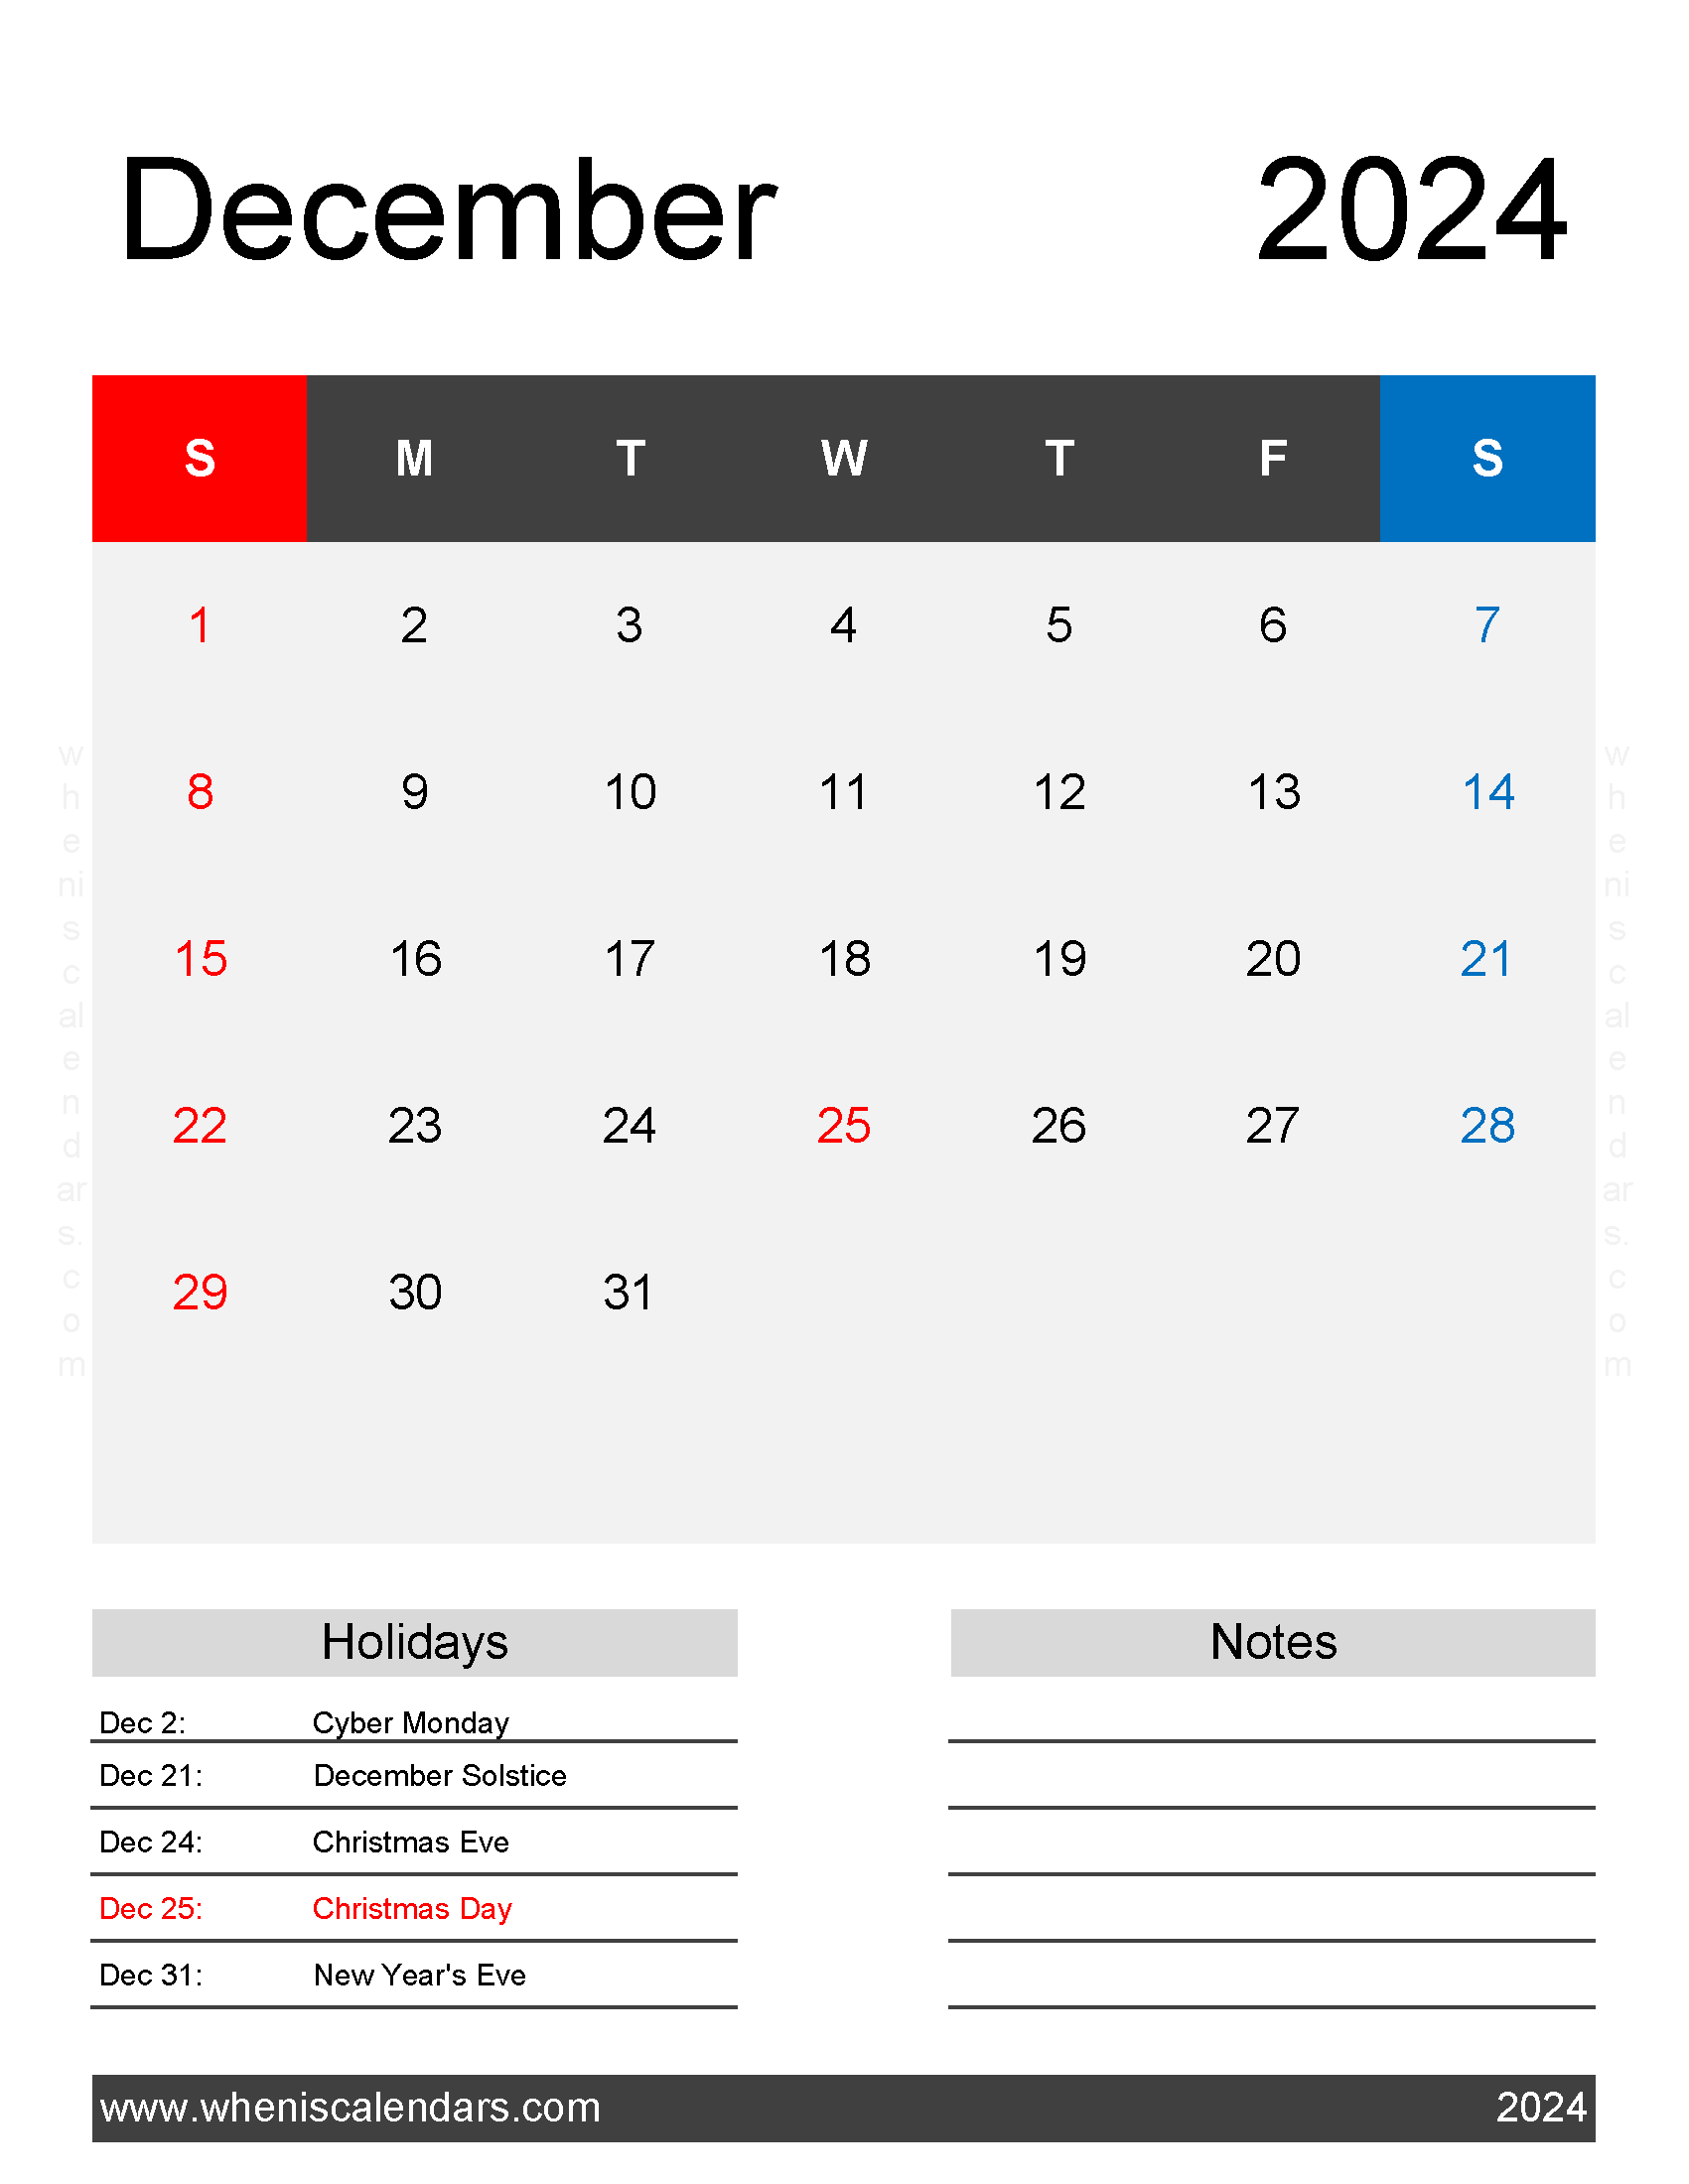 Download free December Calendar 2024 with Holidays printable